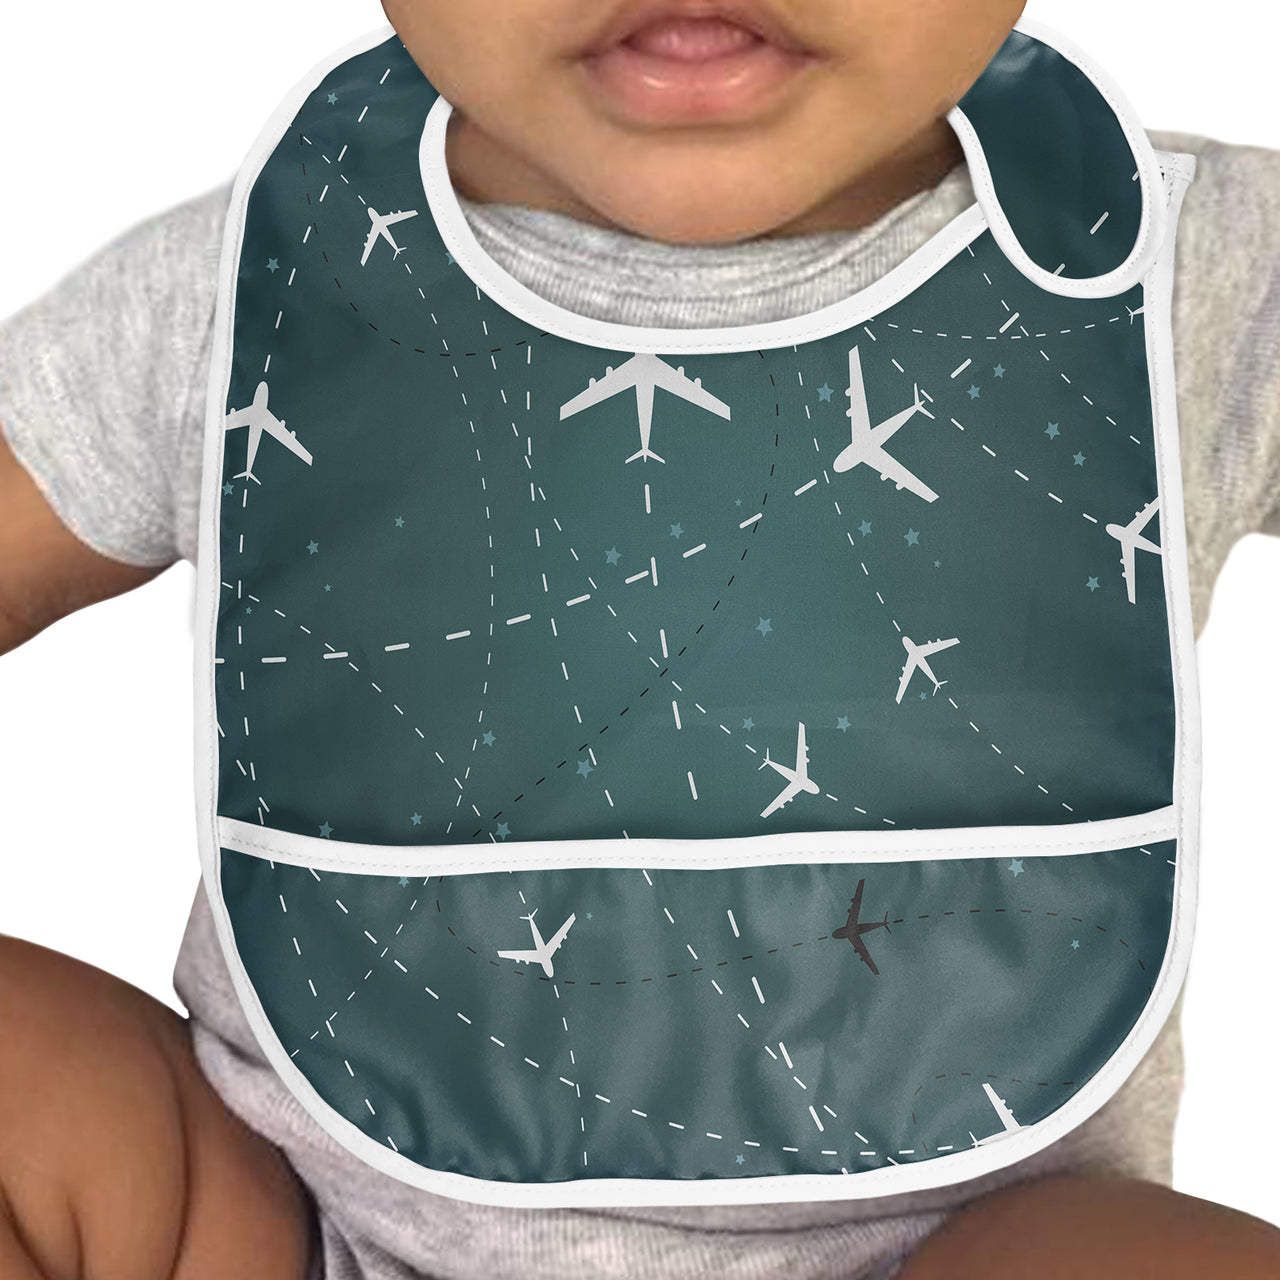 Travelling with Aircraft (Green) Designed Baby Bib